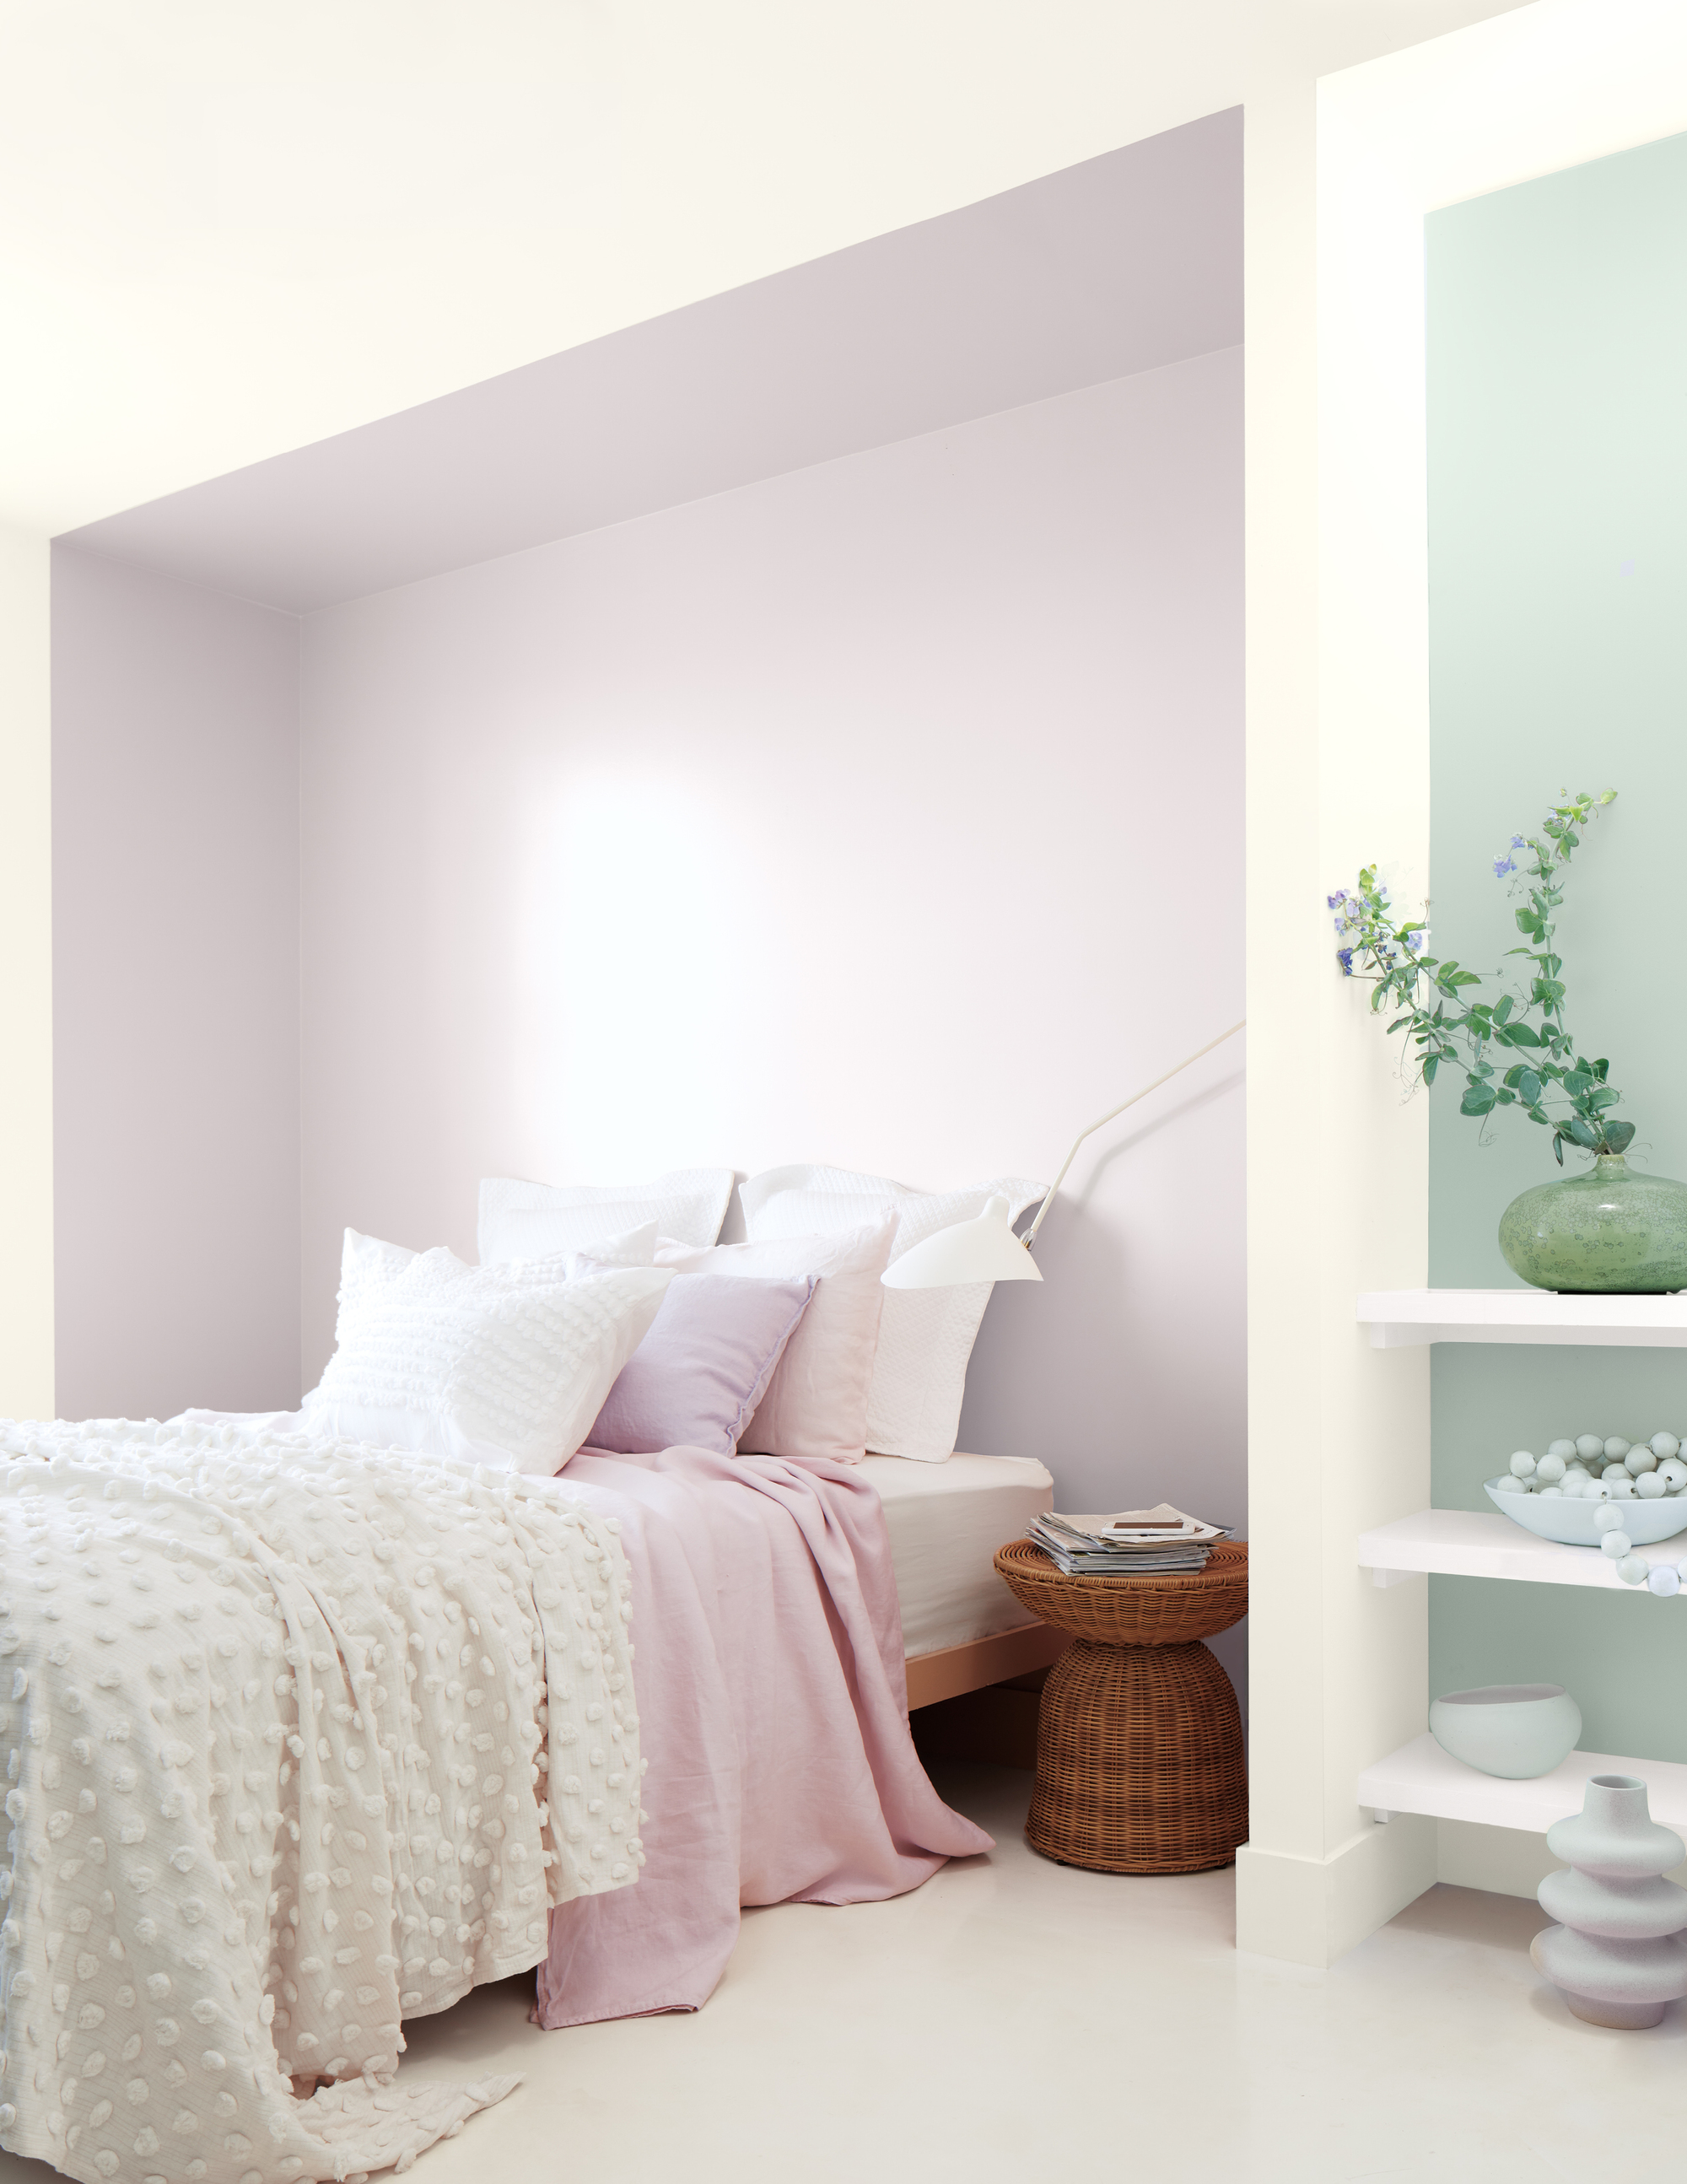 Benjamin Moore, Hint of violet paired with quiet moments